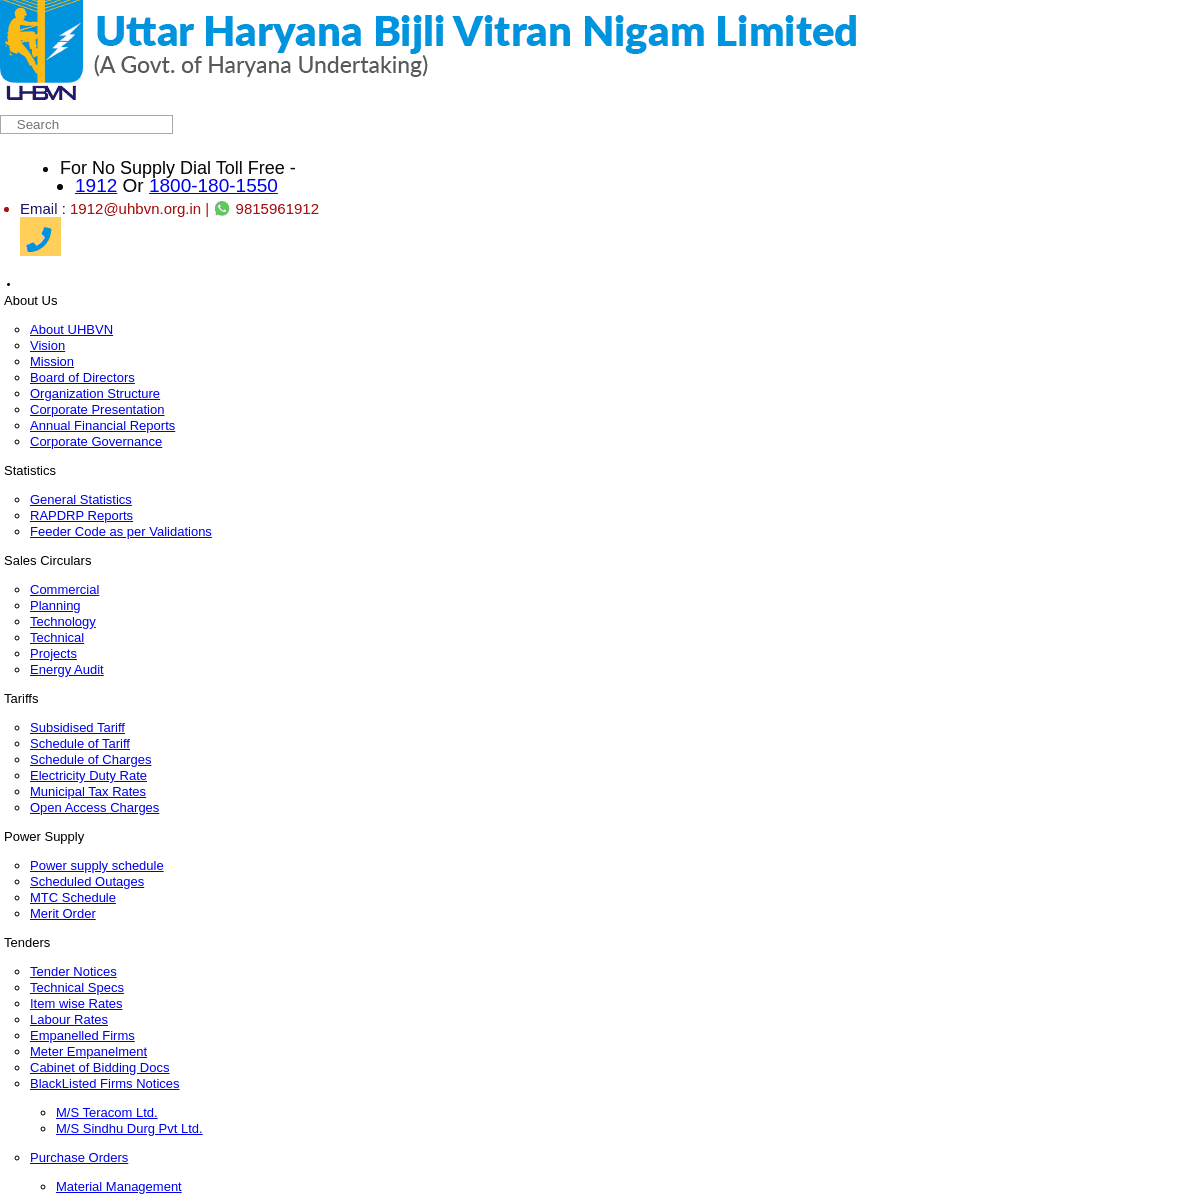 A complete backup of uhbvn.org.in